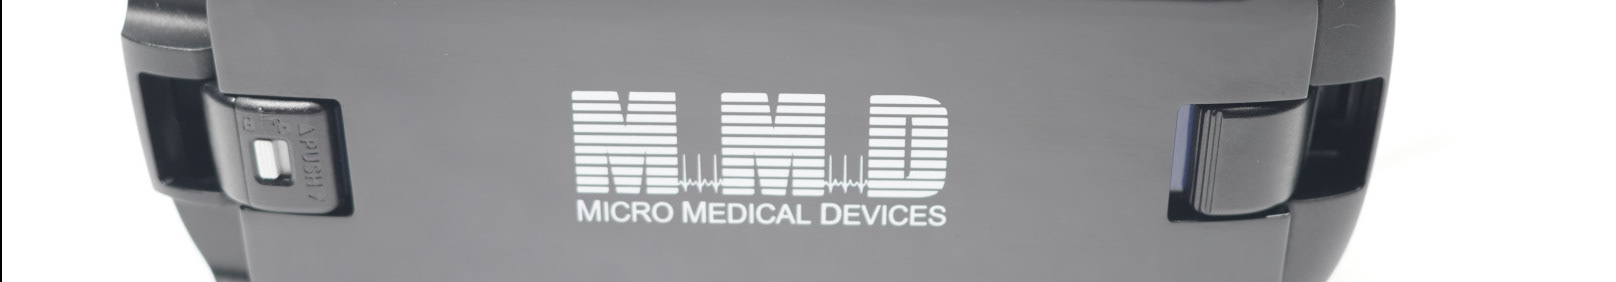 Micro Medical Devices's profile banner